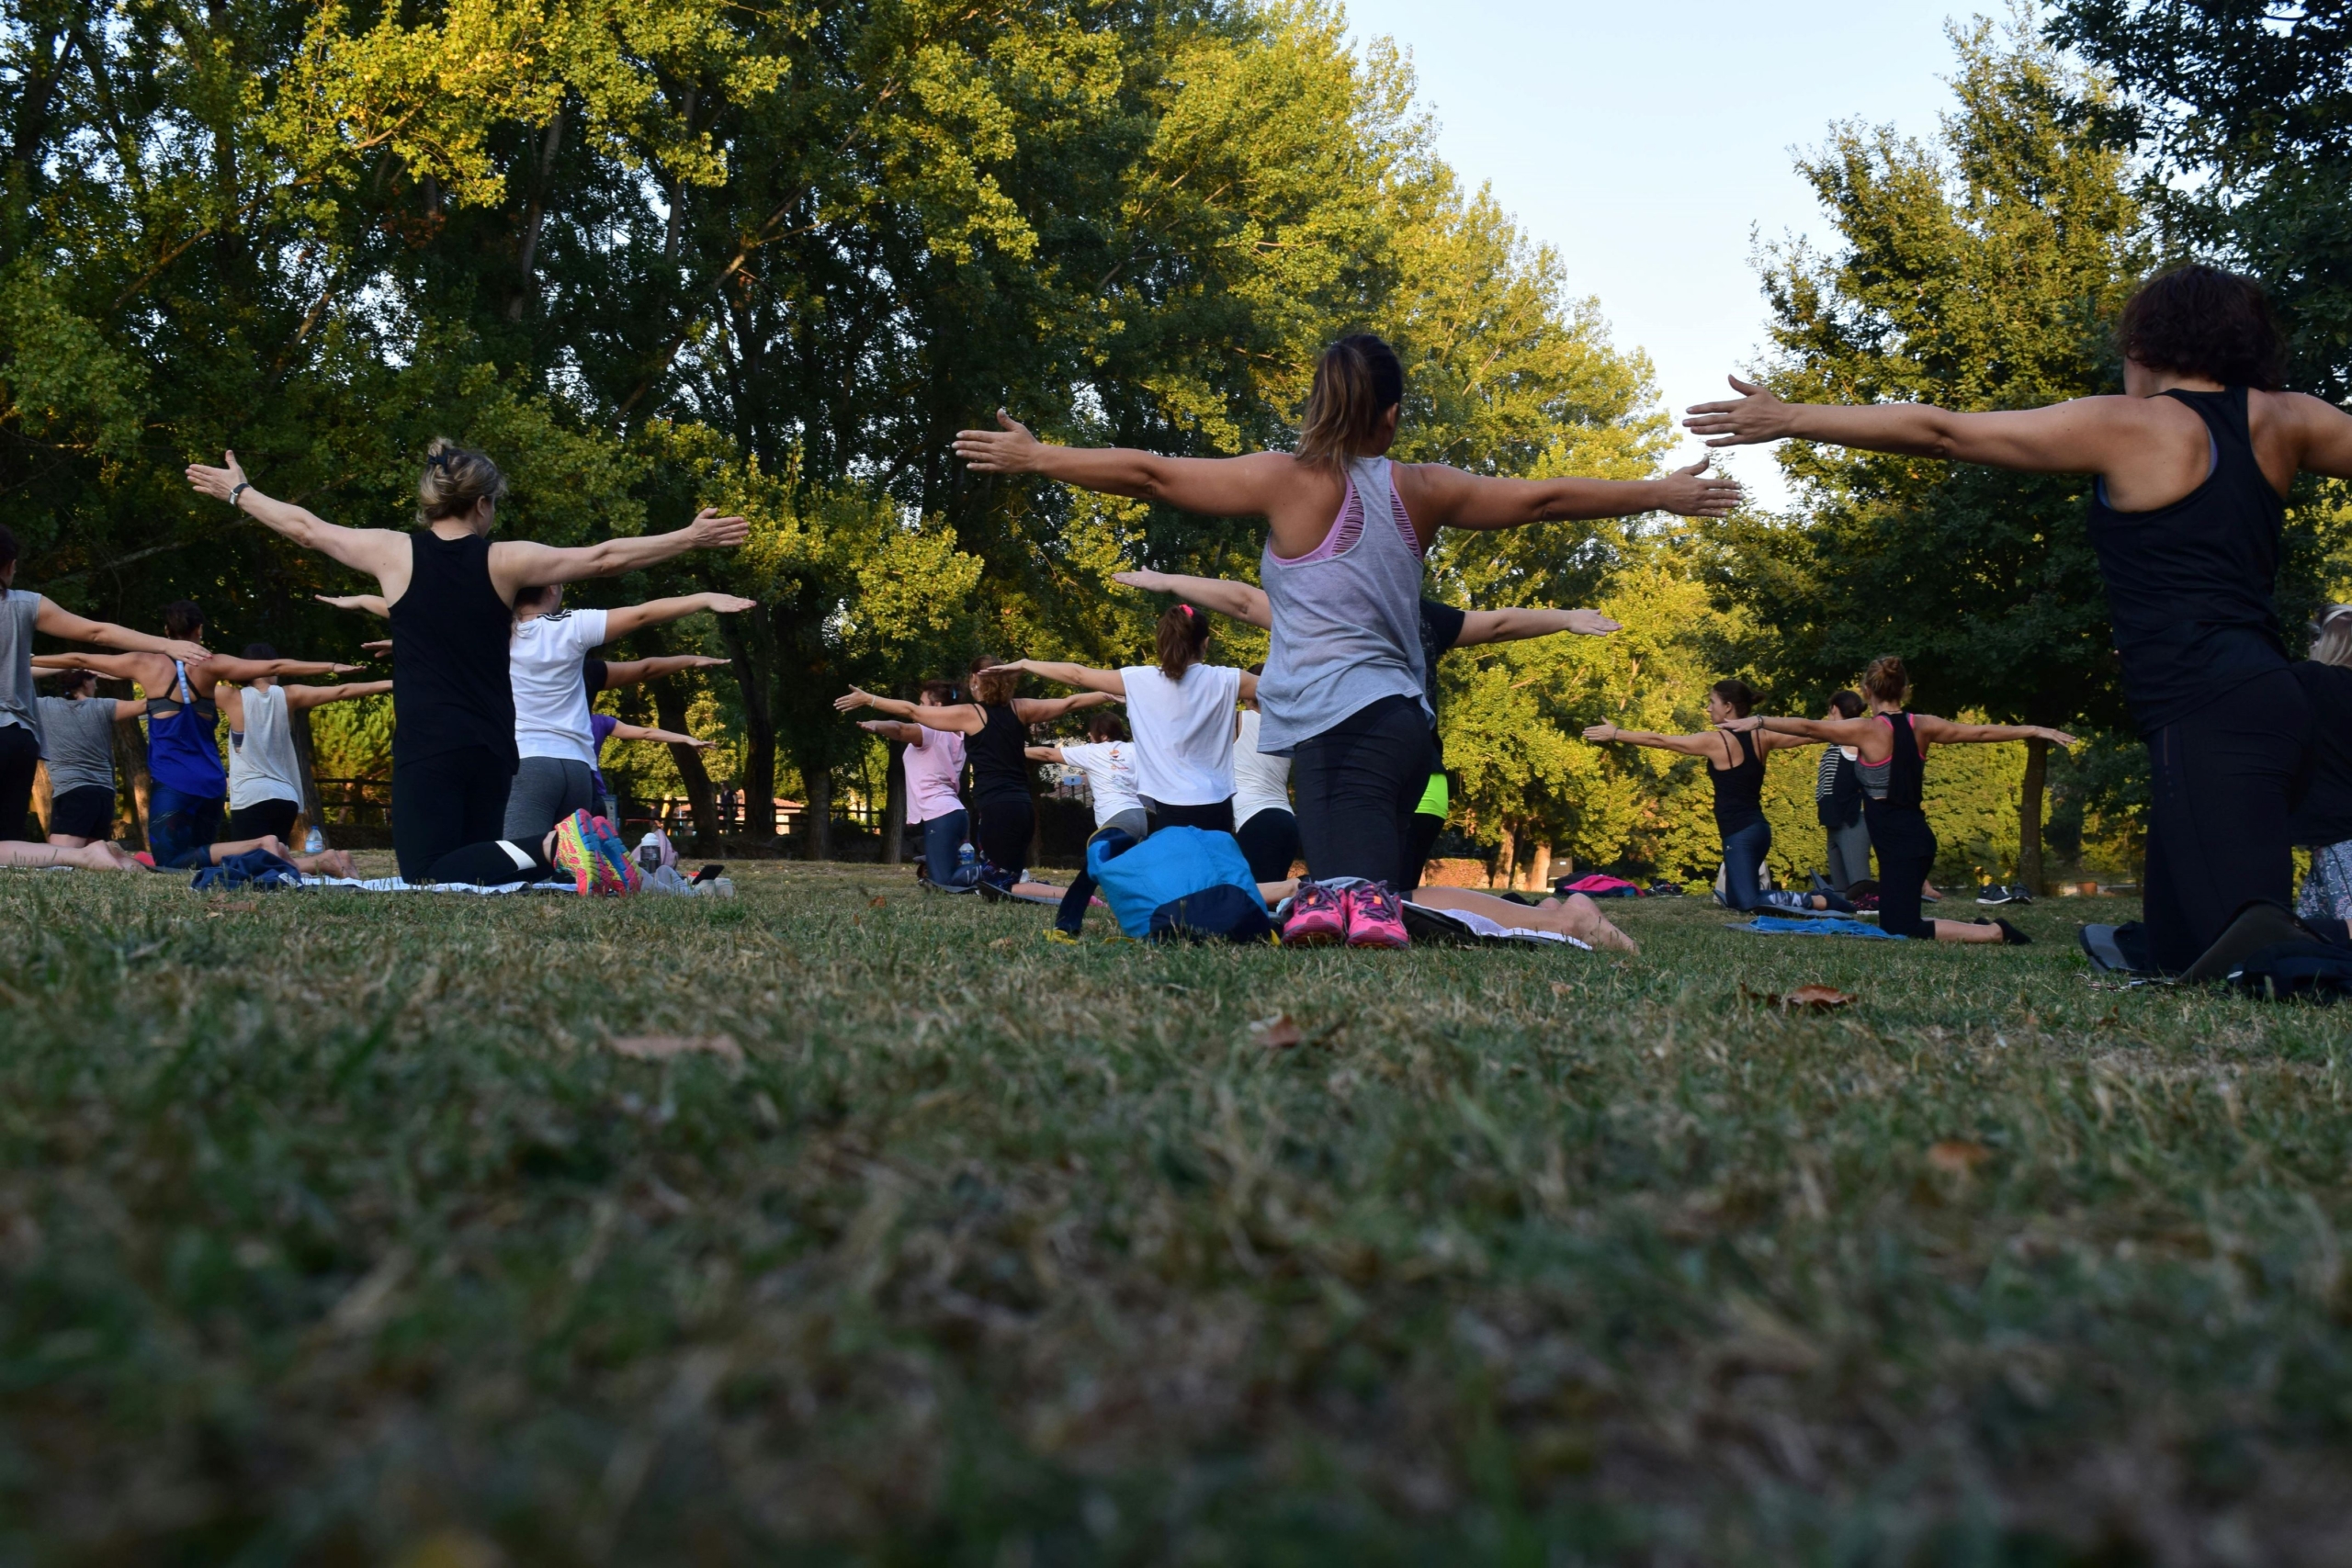 A group of people kneeling and holding their arms out in an outdoor yoga class